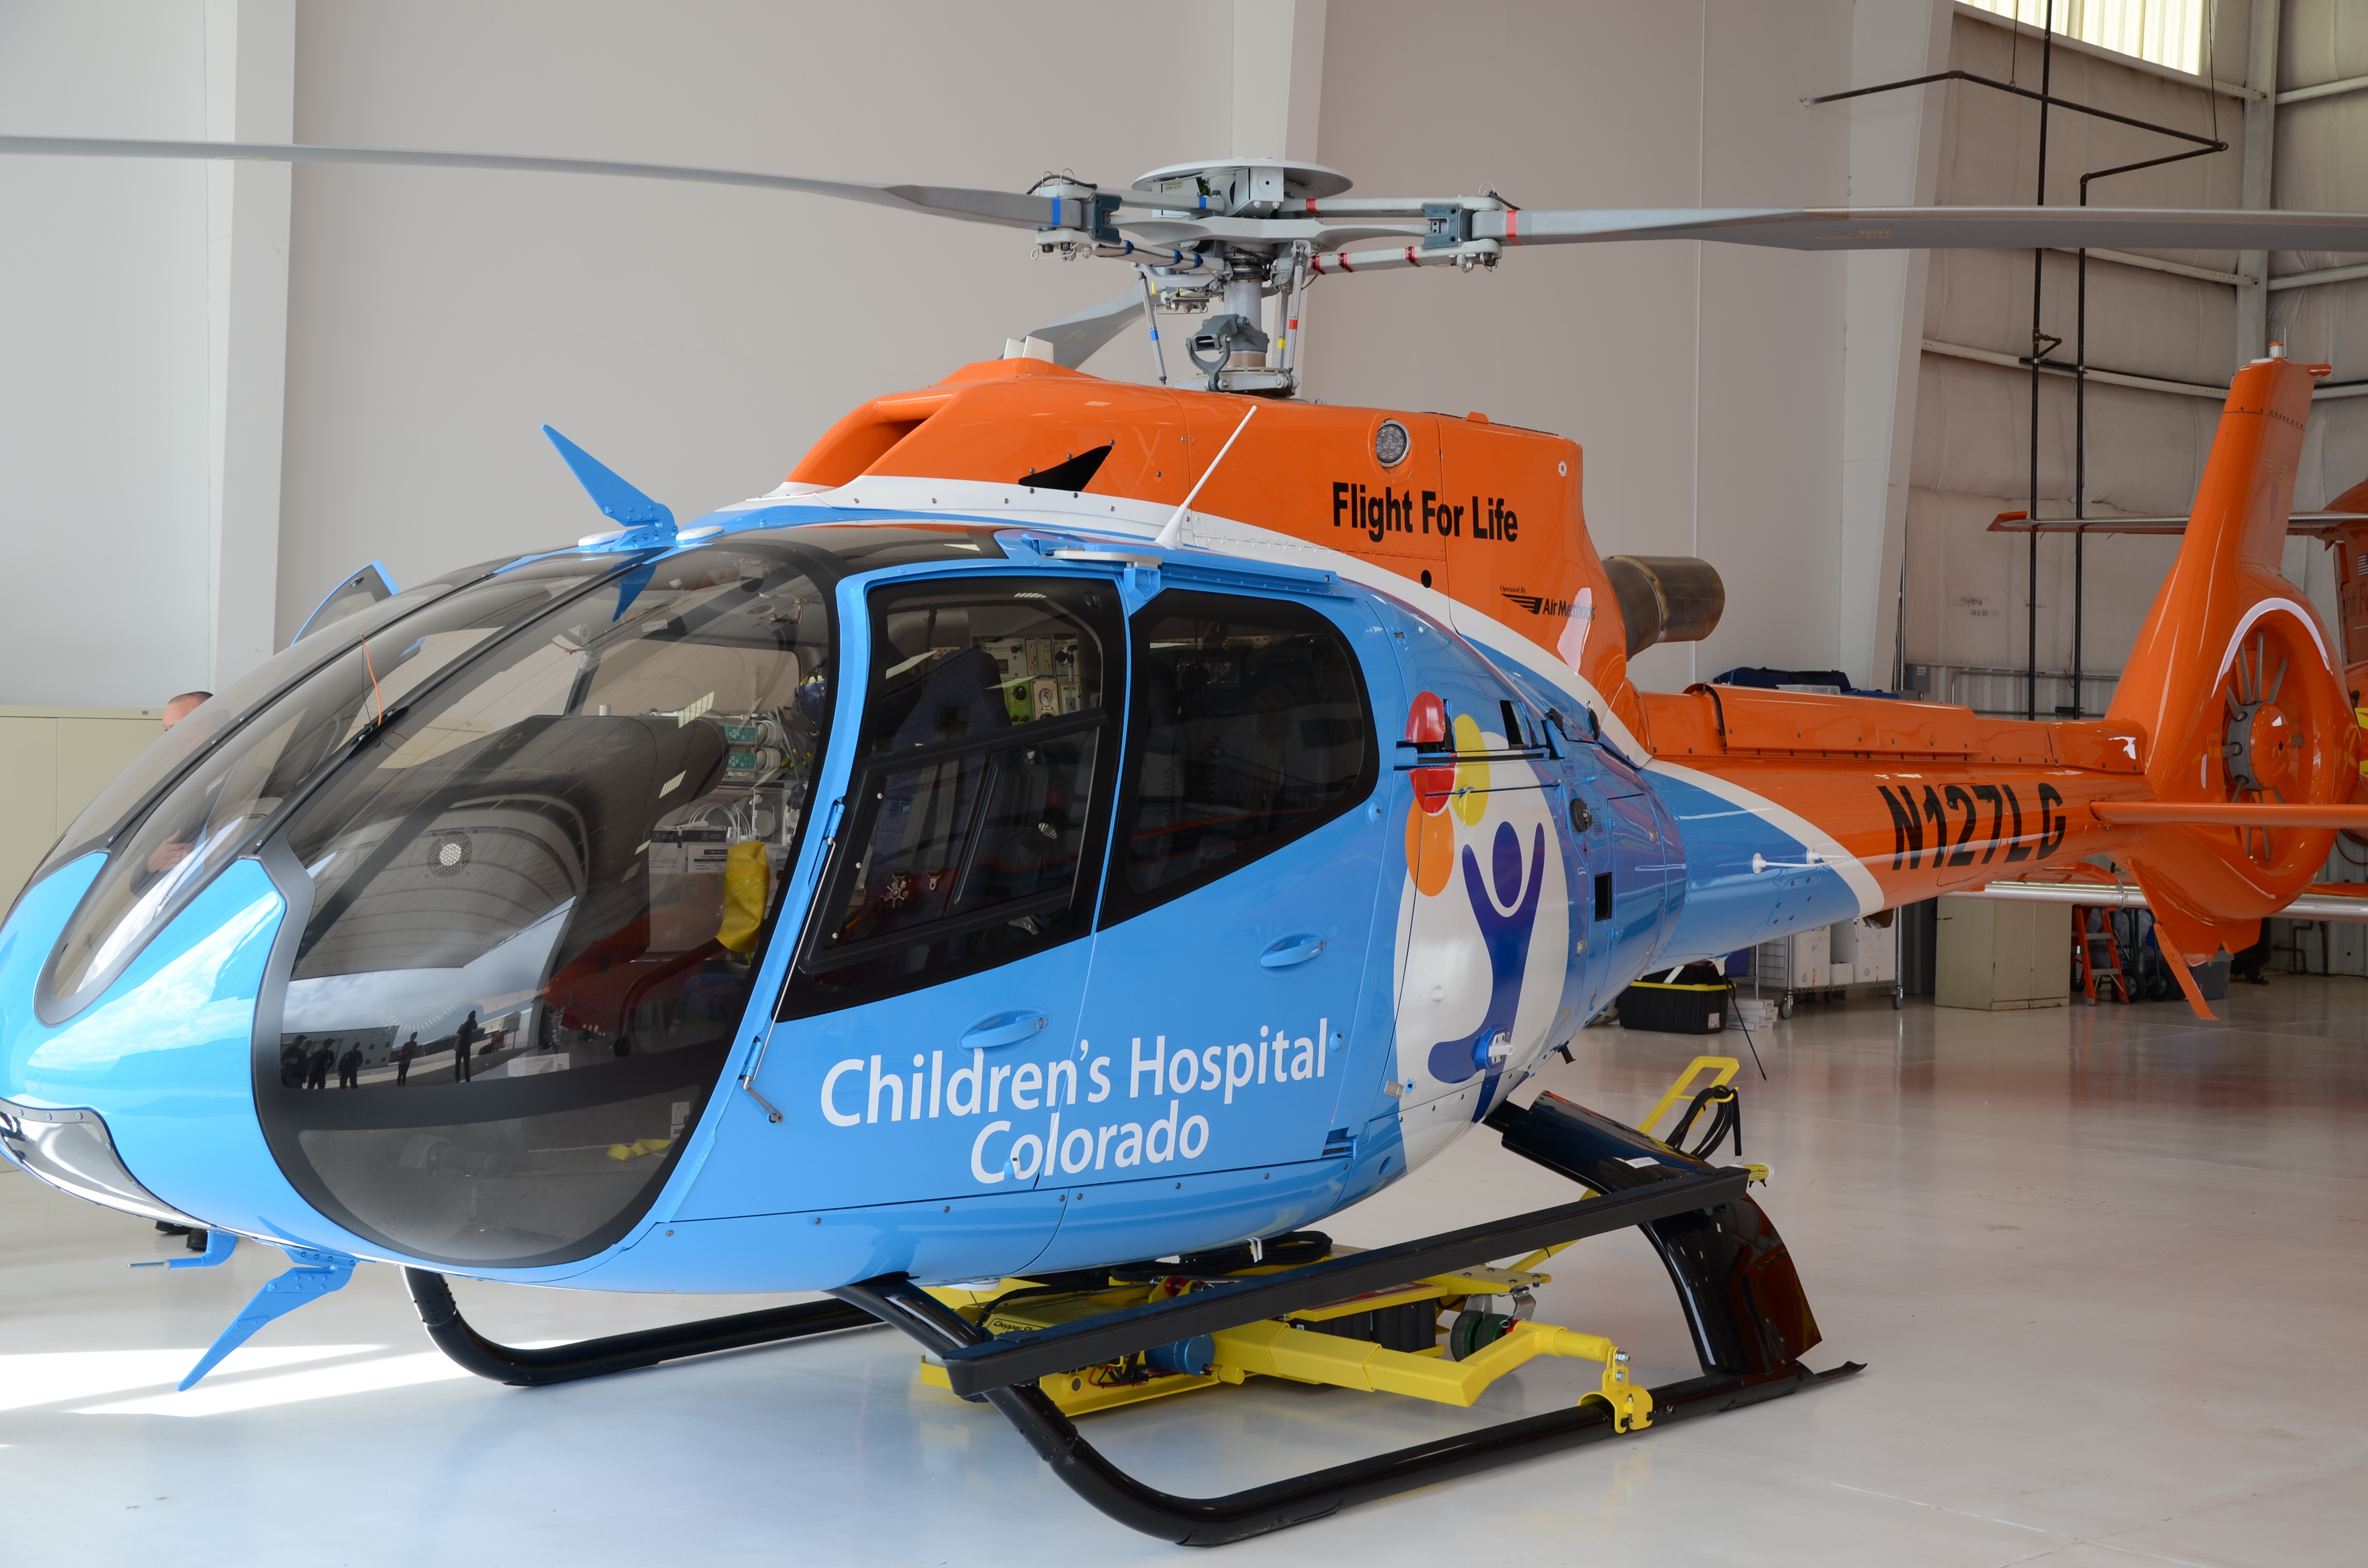 Airbus H130 with Children's Hospital Colorado livery